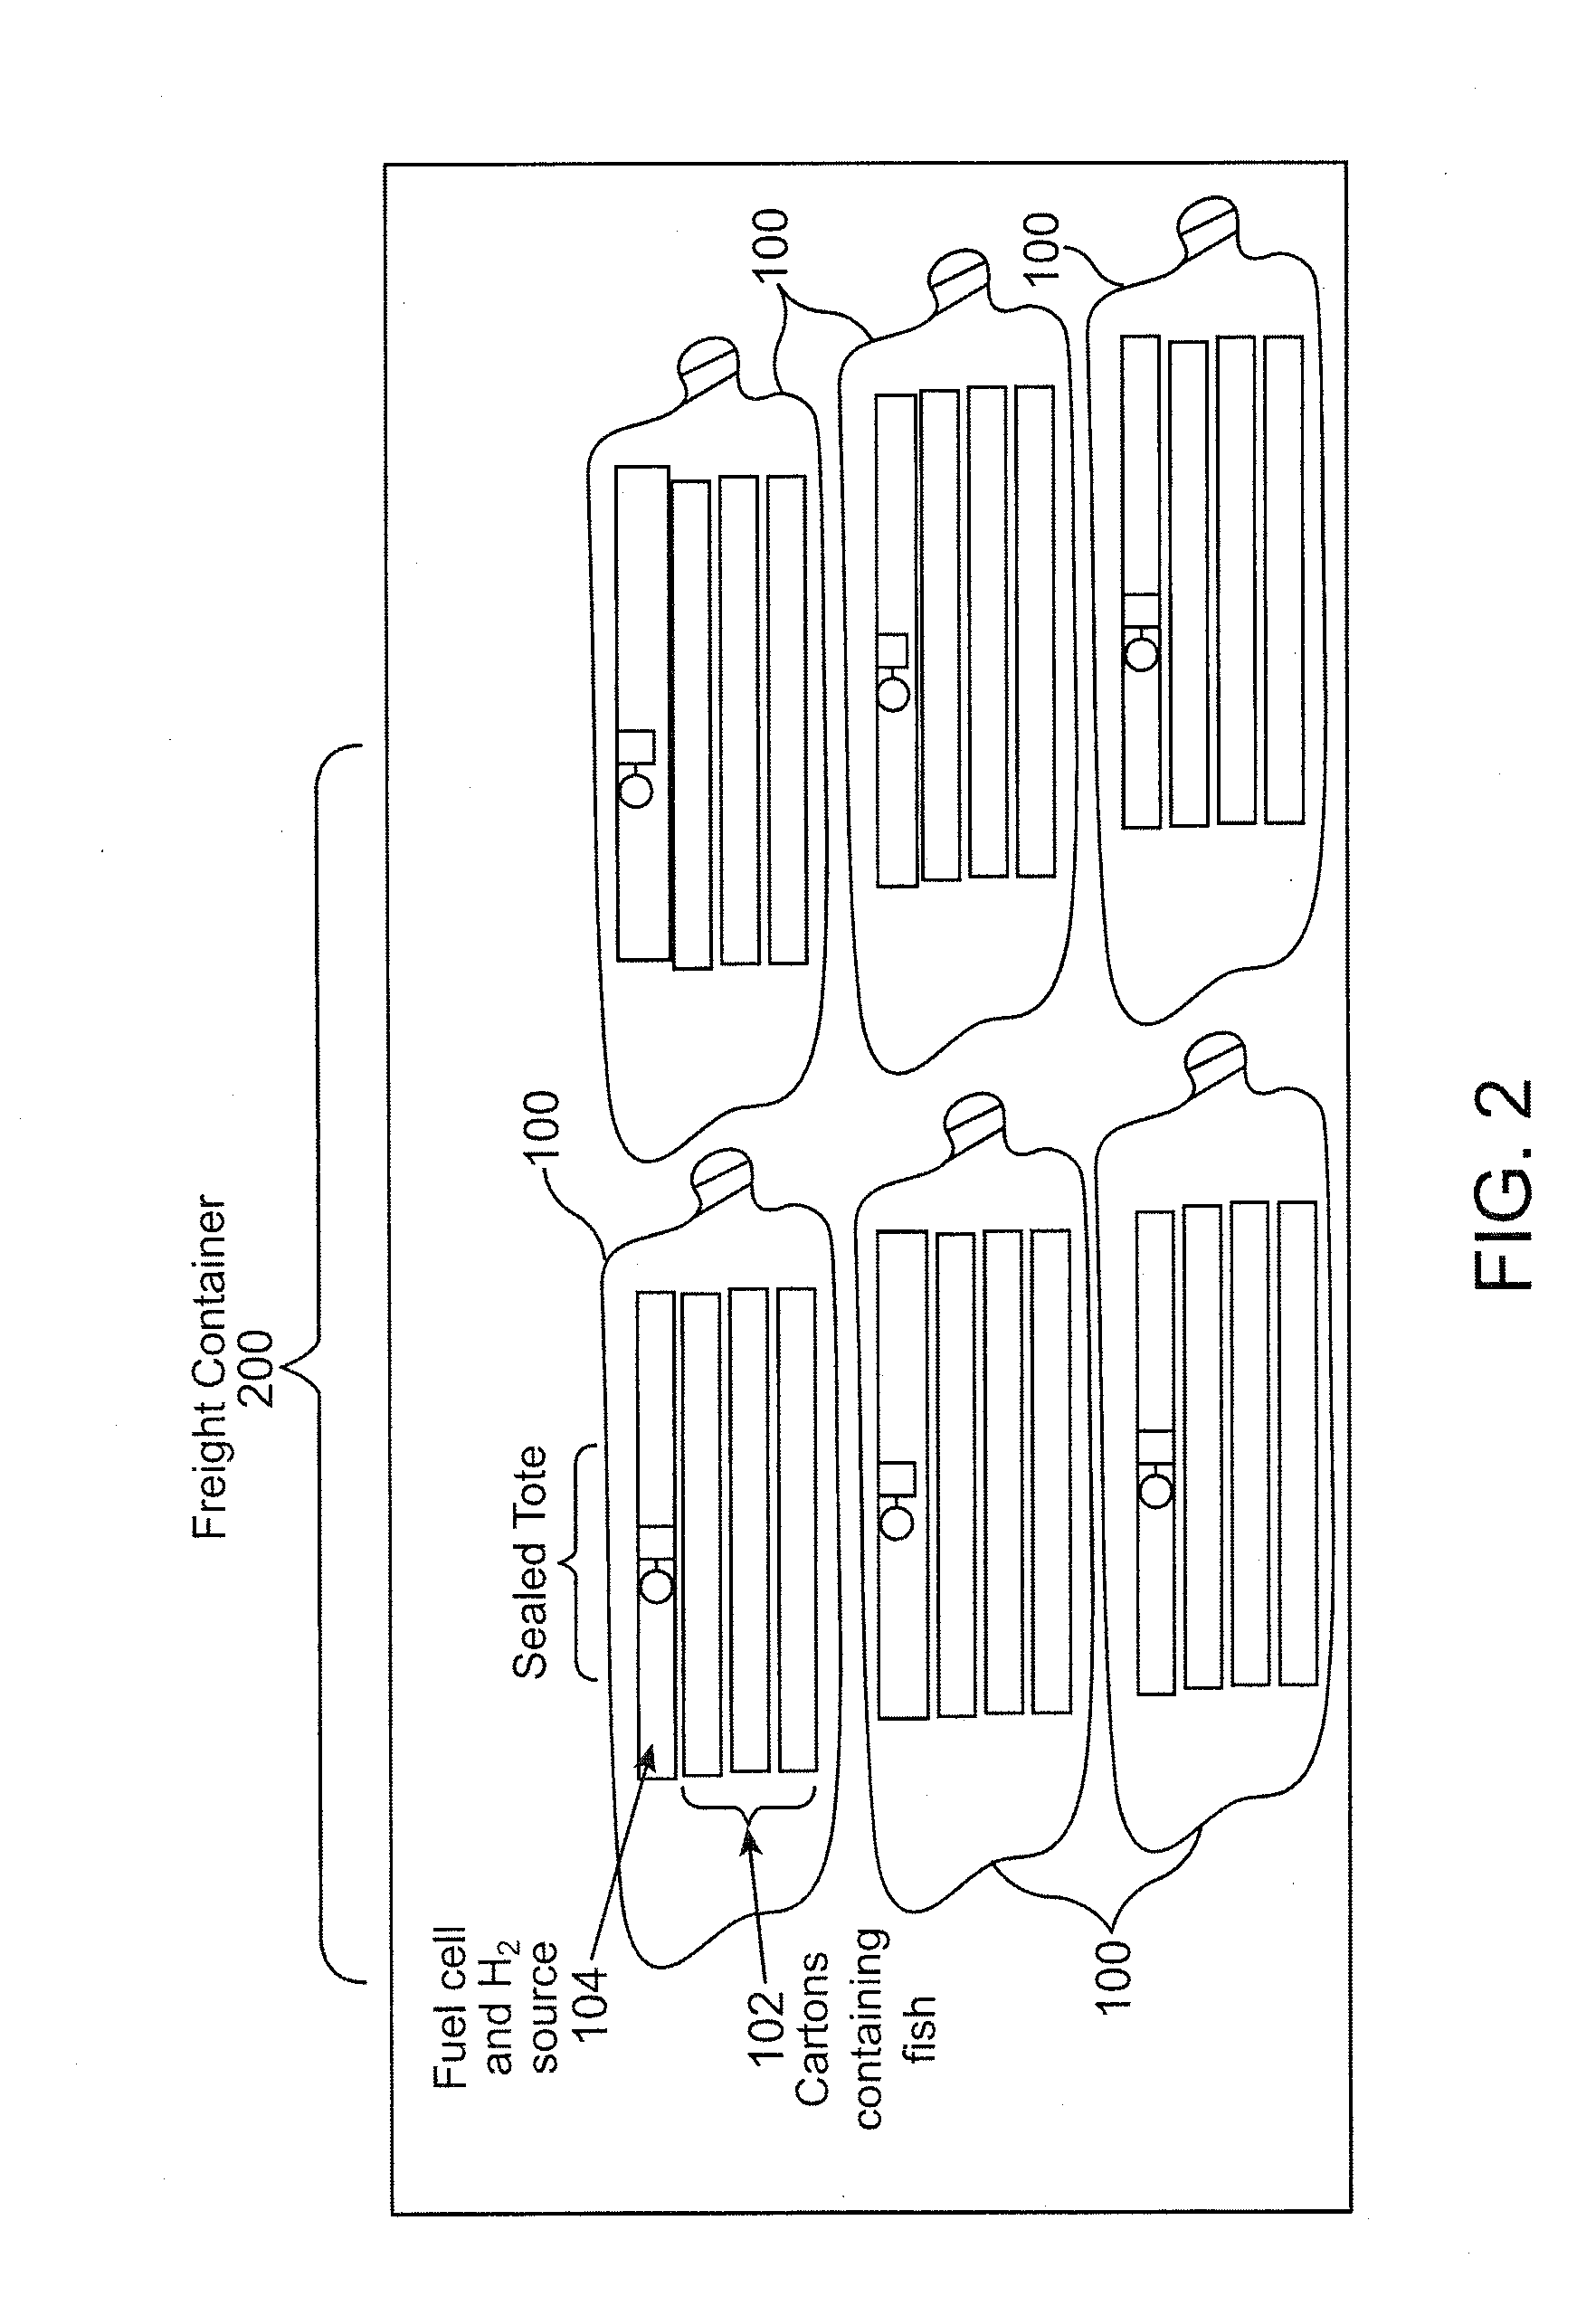 System and methods for transporting or storing oxidatively-degradable foodstuff